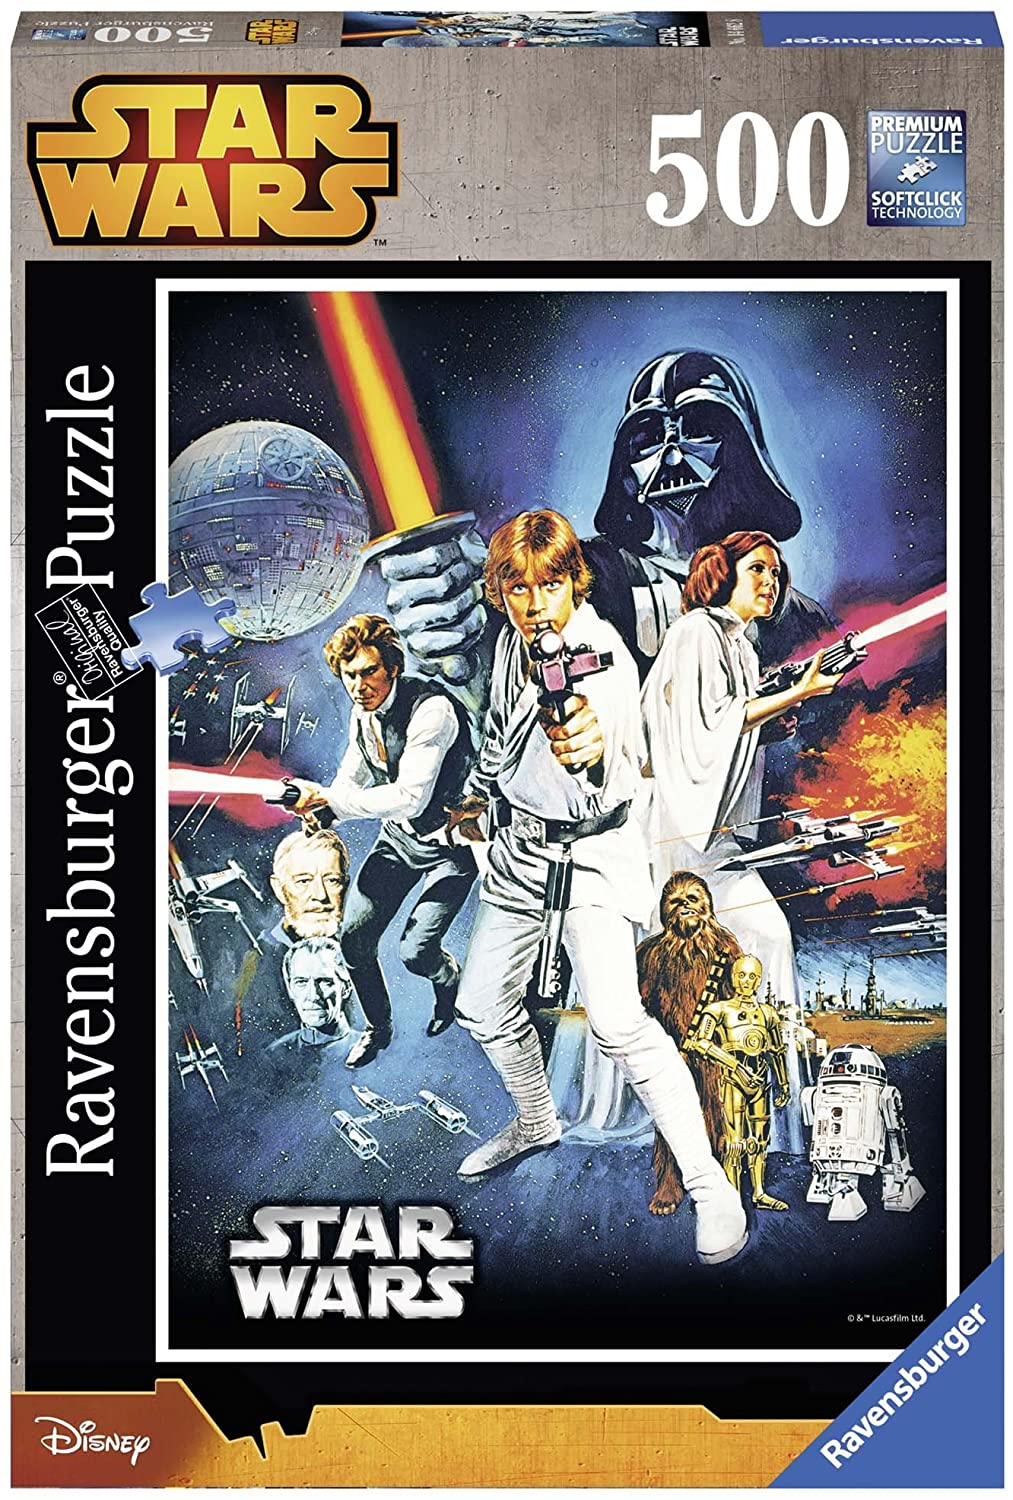  Buffalo Games Star Wars A New Hope - 300 Large Piece